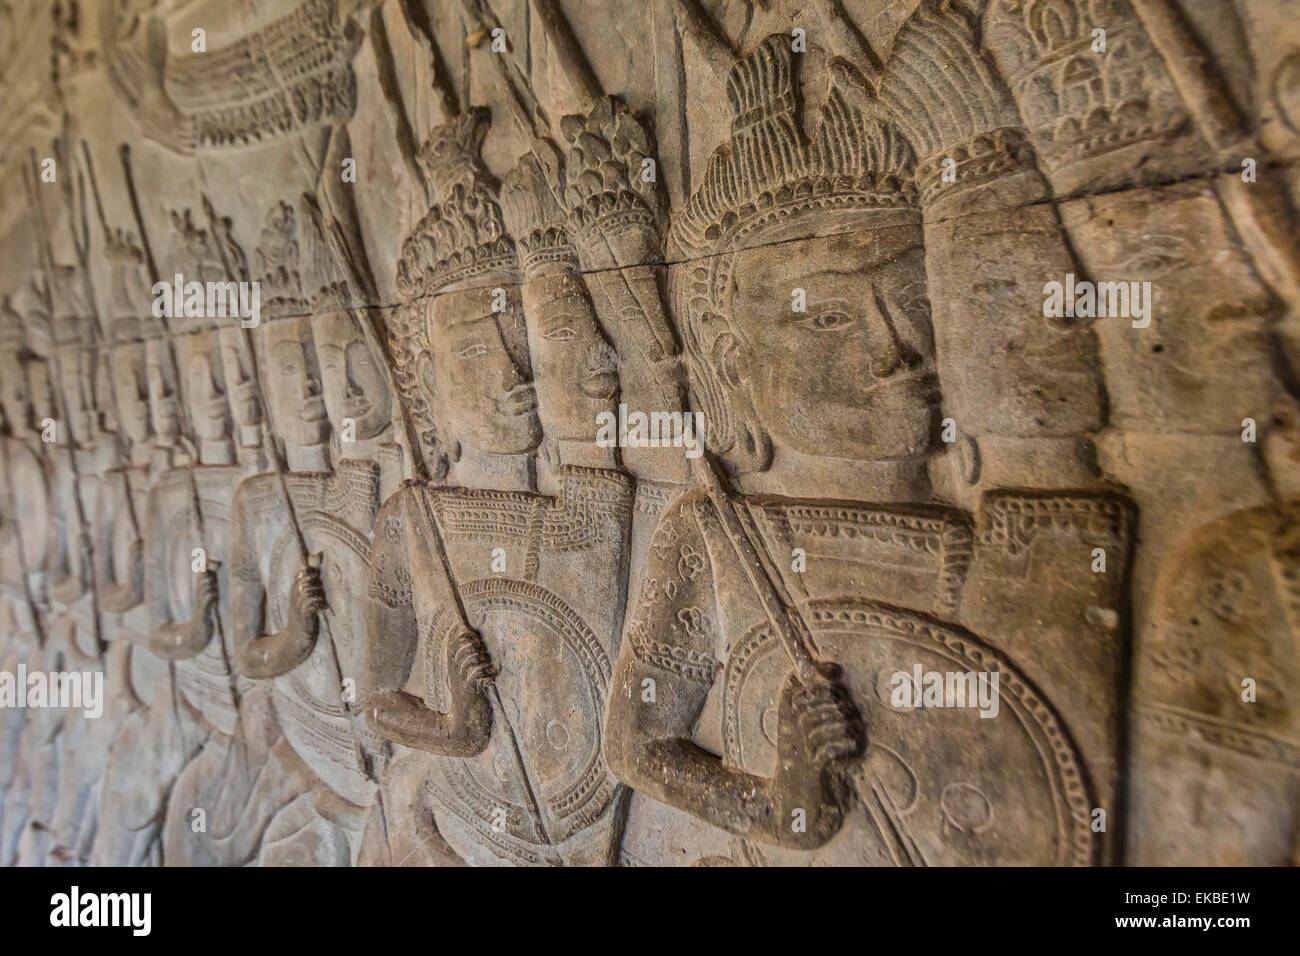 Bas-relief carvings, Angkor Wat, Angkor, UNESCO World Heritage Site, Siem Reap, Cambodia, Indochina, Southeast Asia, Asia Stock Photo